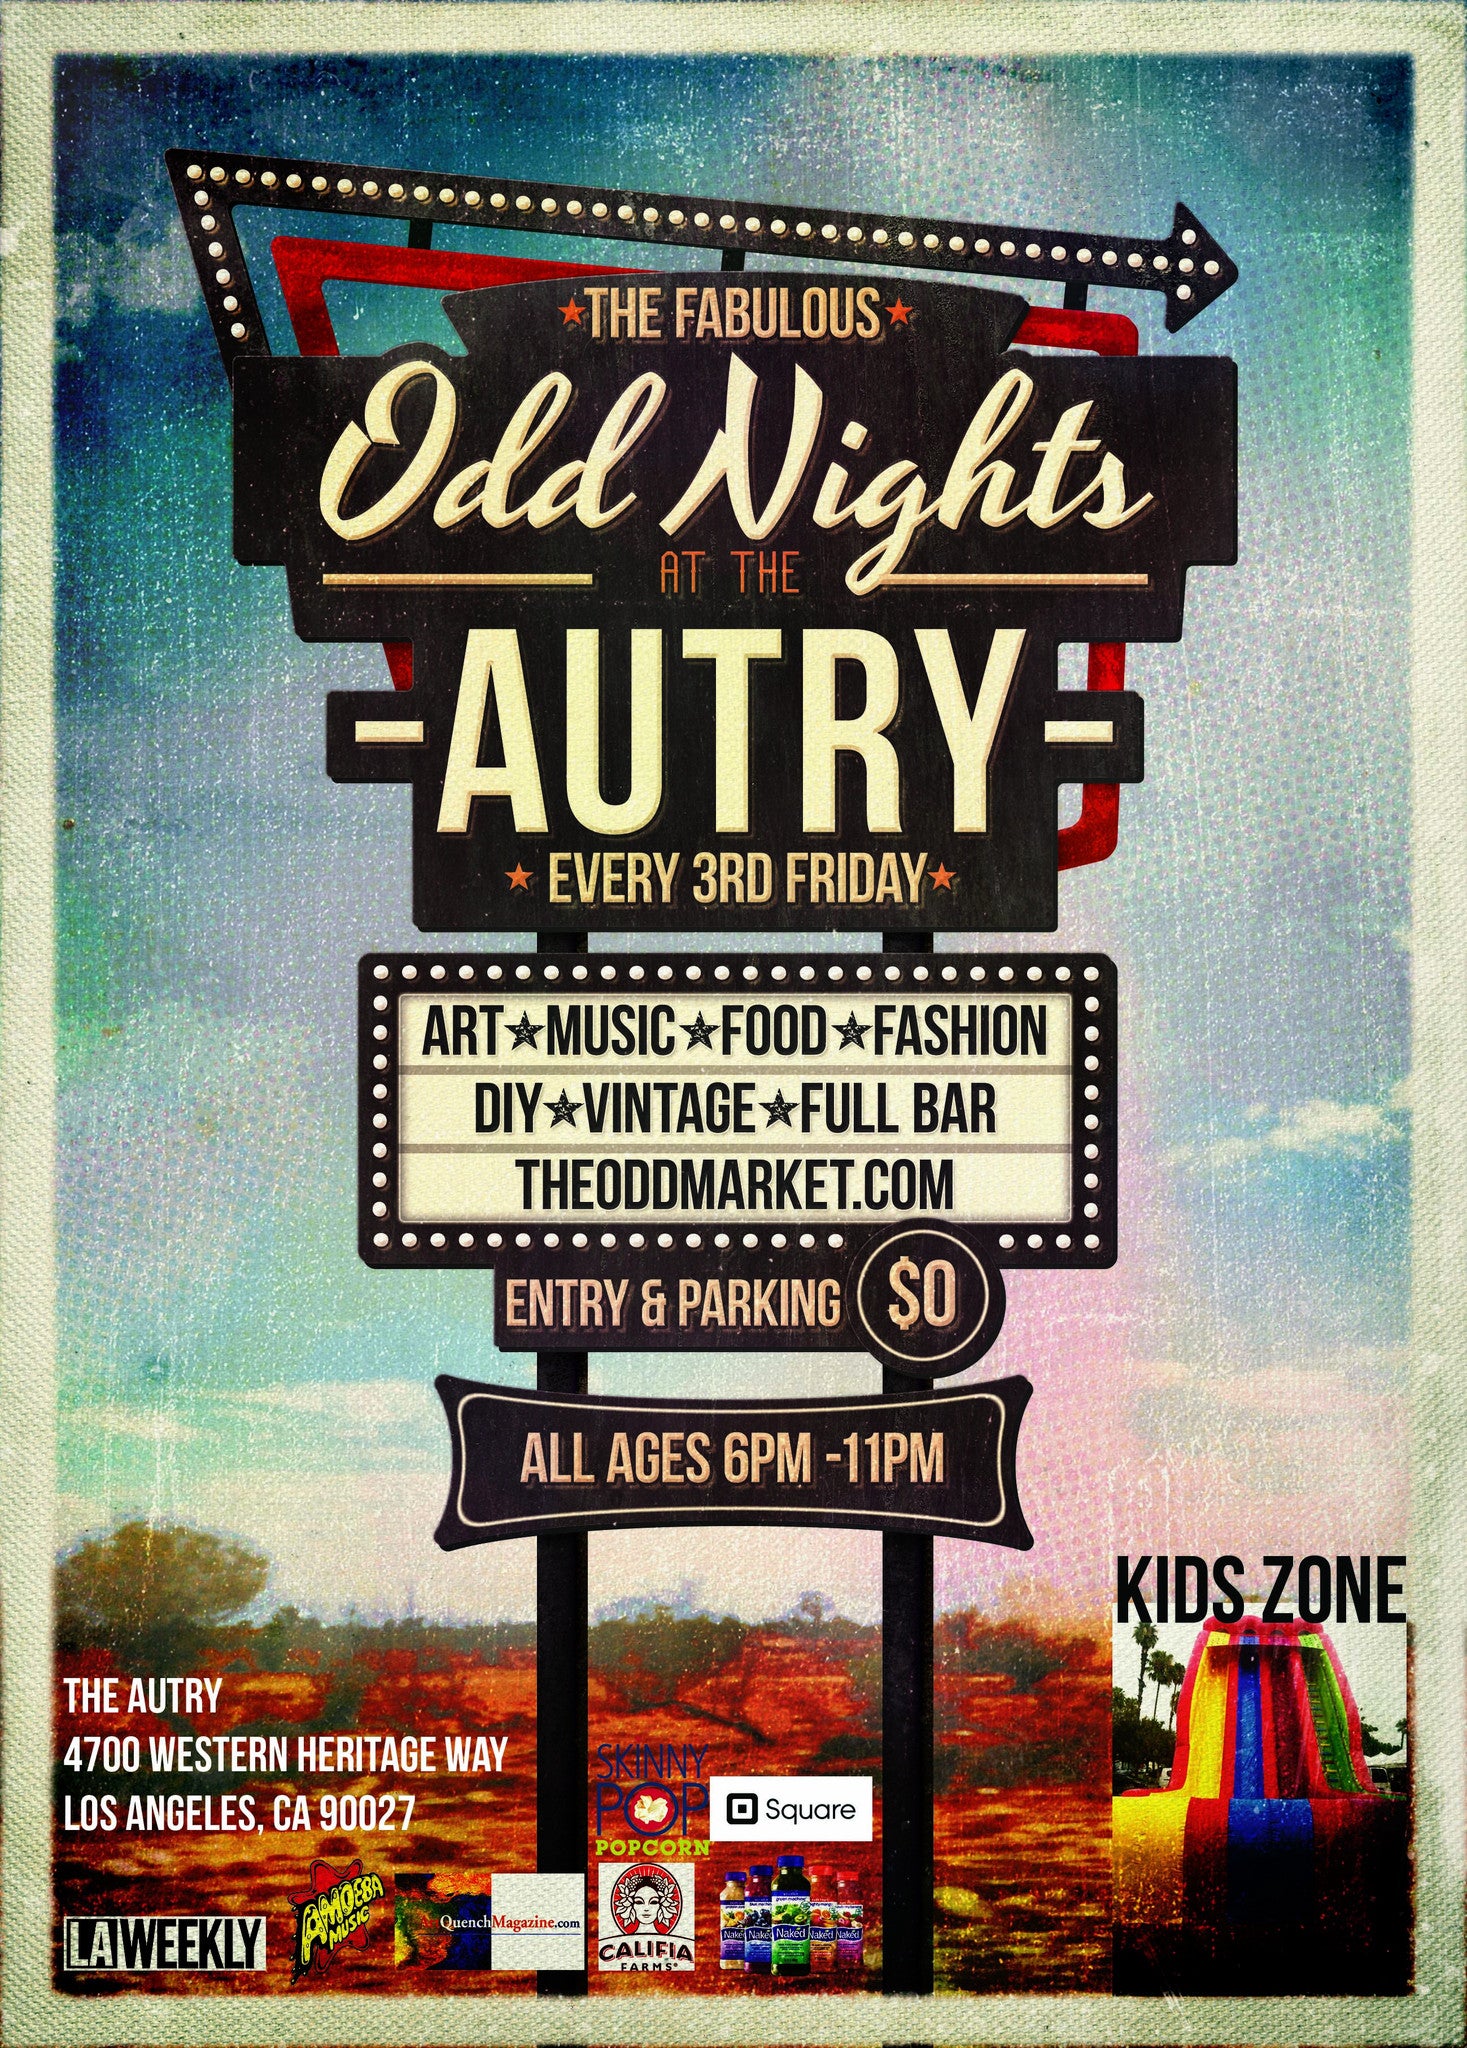 We will be @ Odd Nights at the Autry on April 15th!!!!